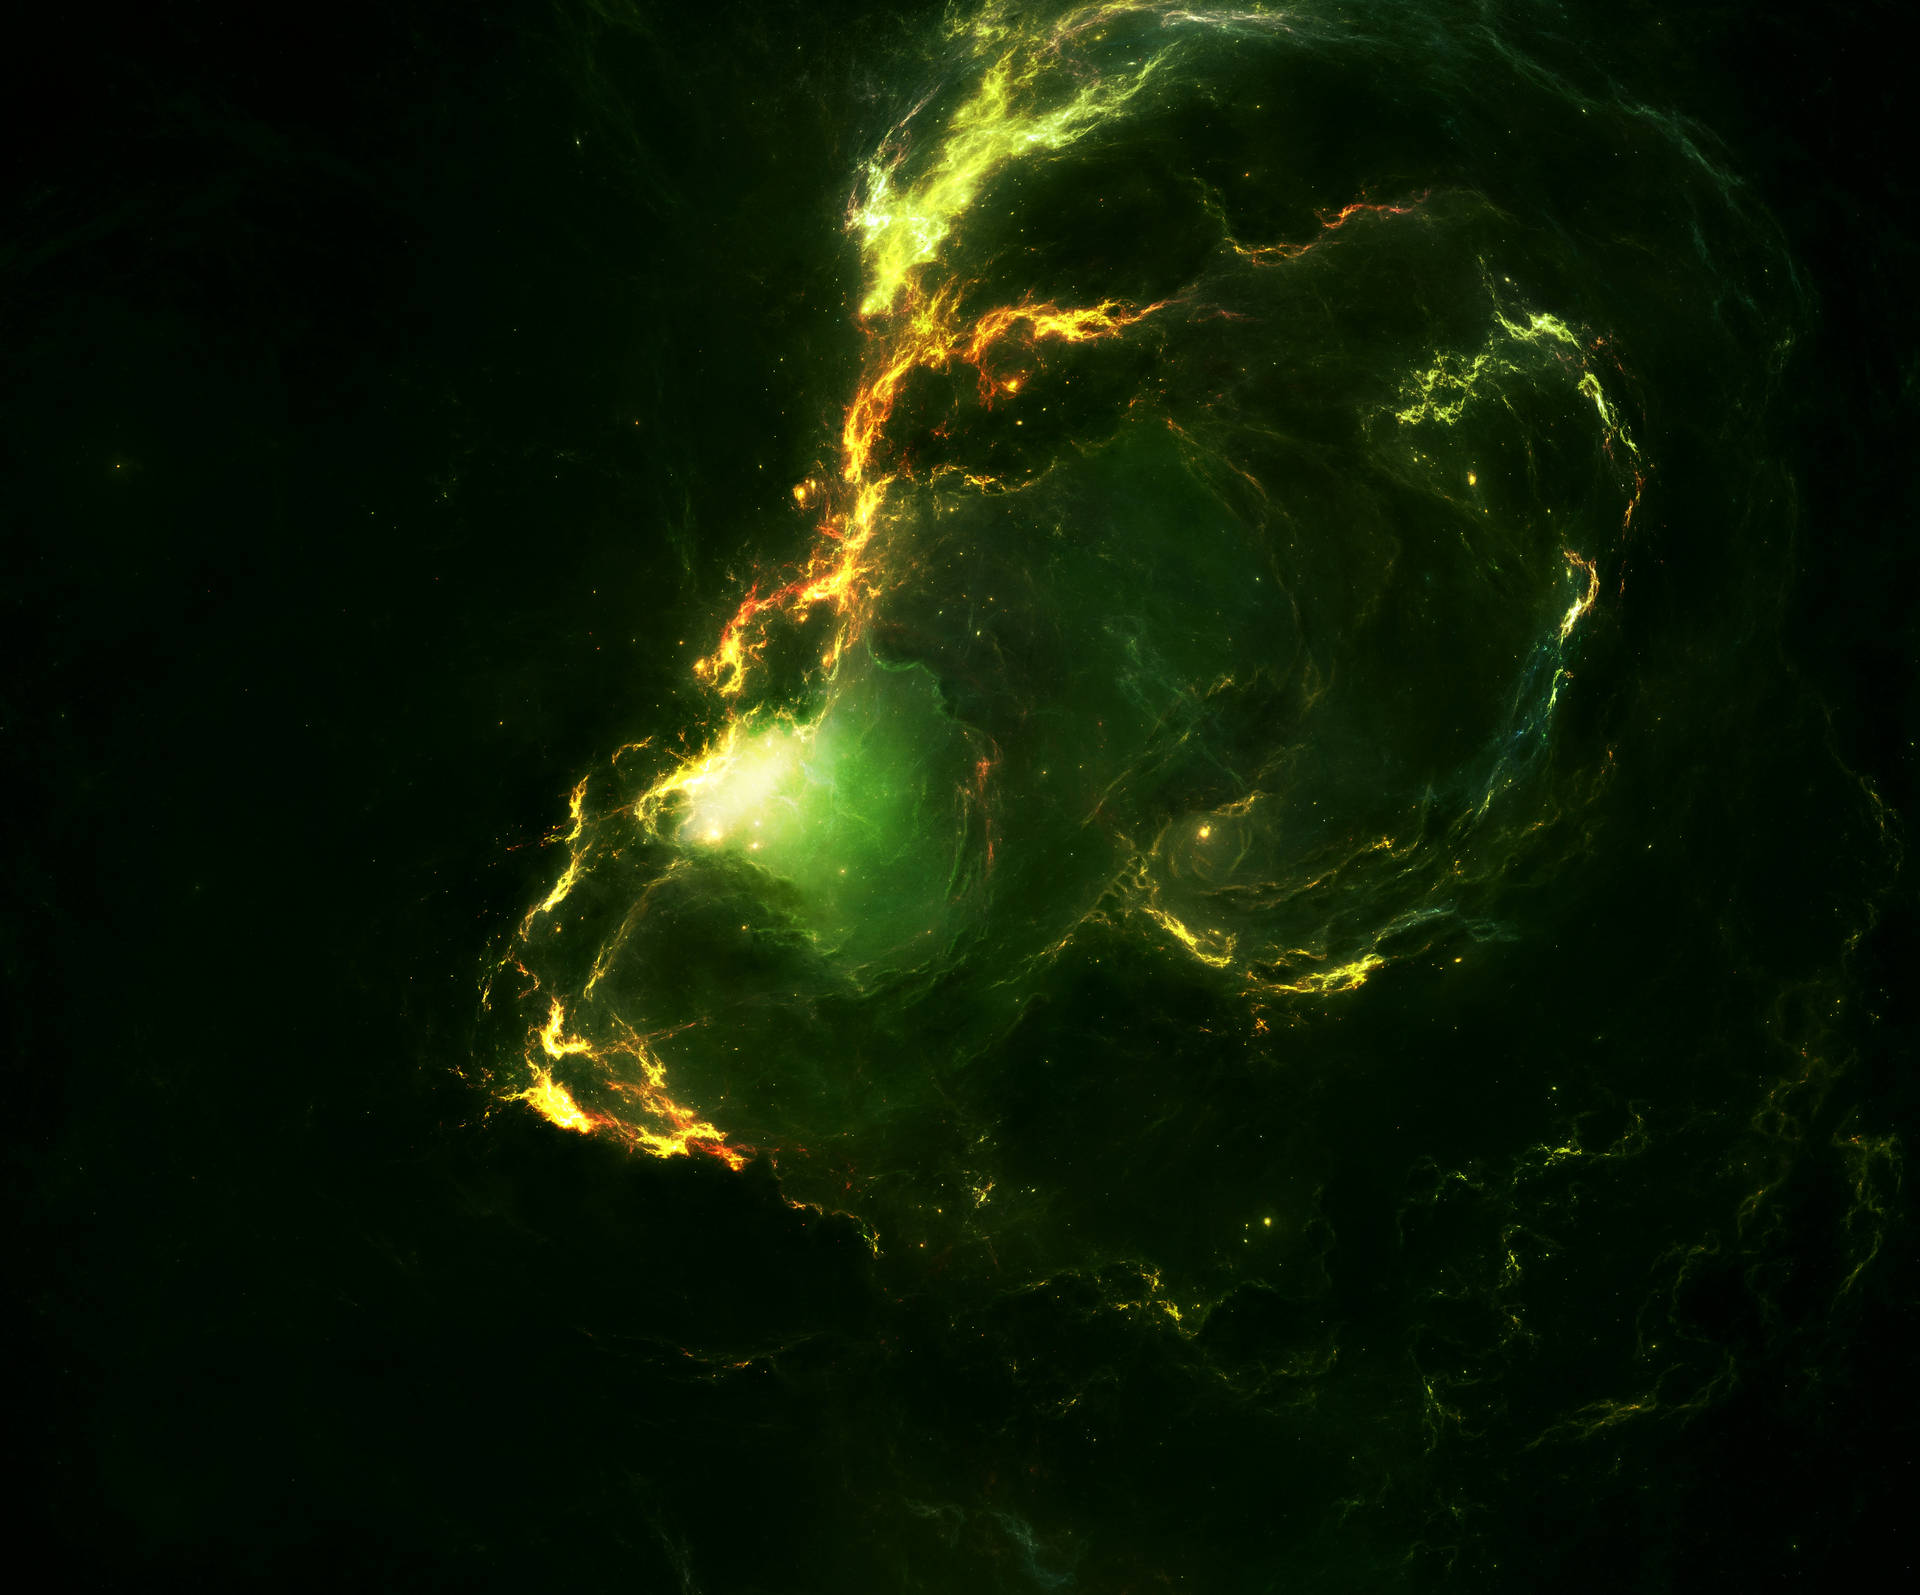 Explore the Wonders of the Universe with Nebula Wallpaper